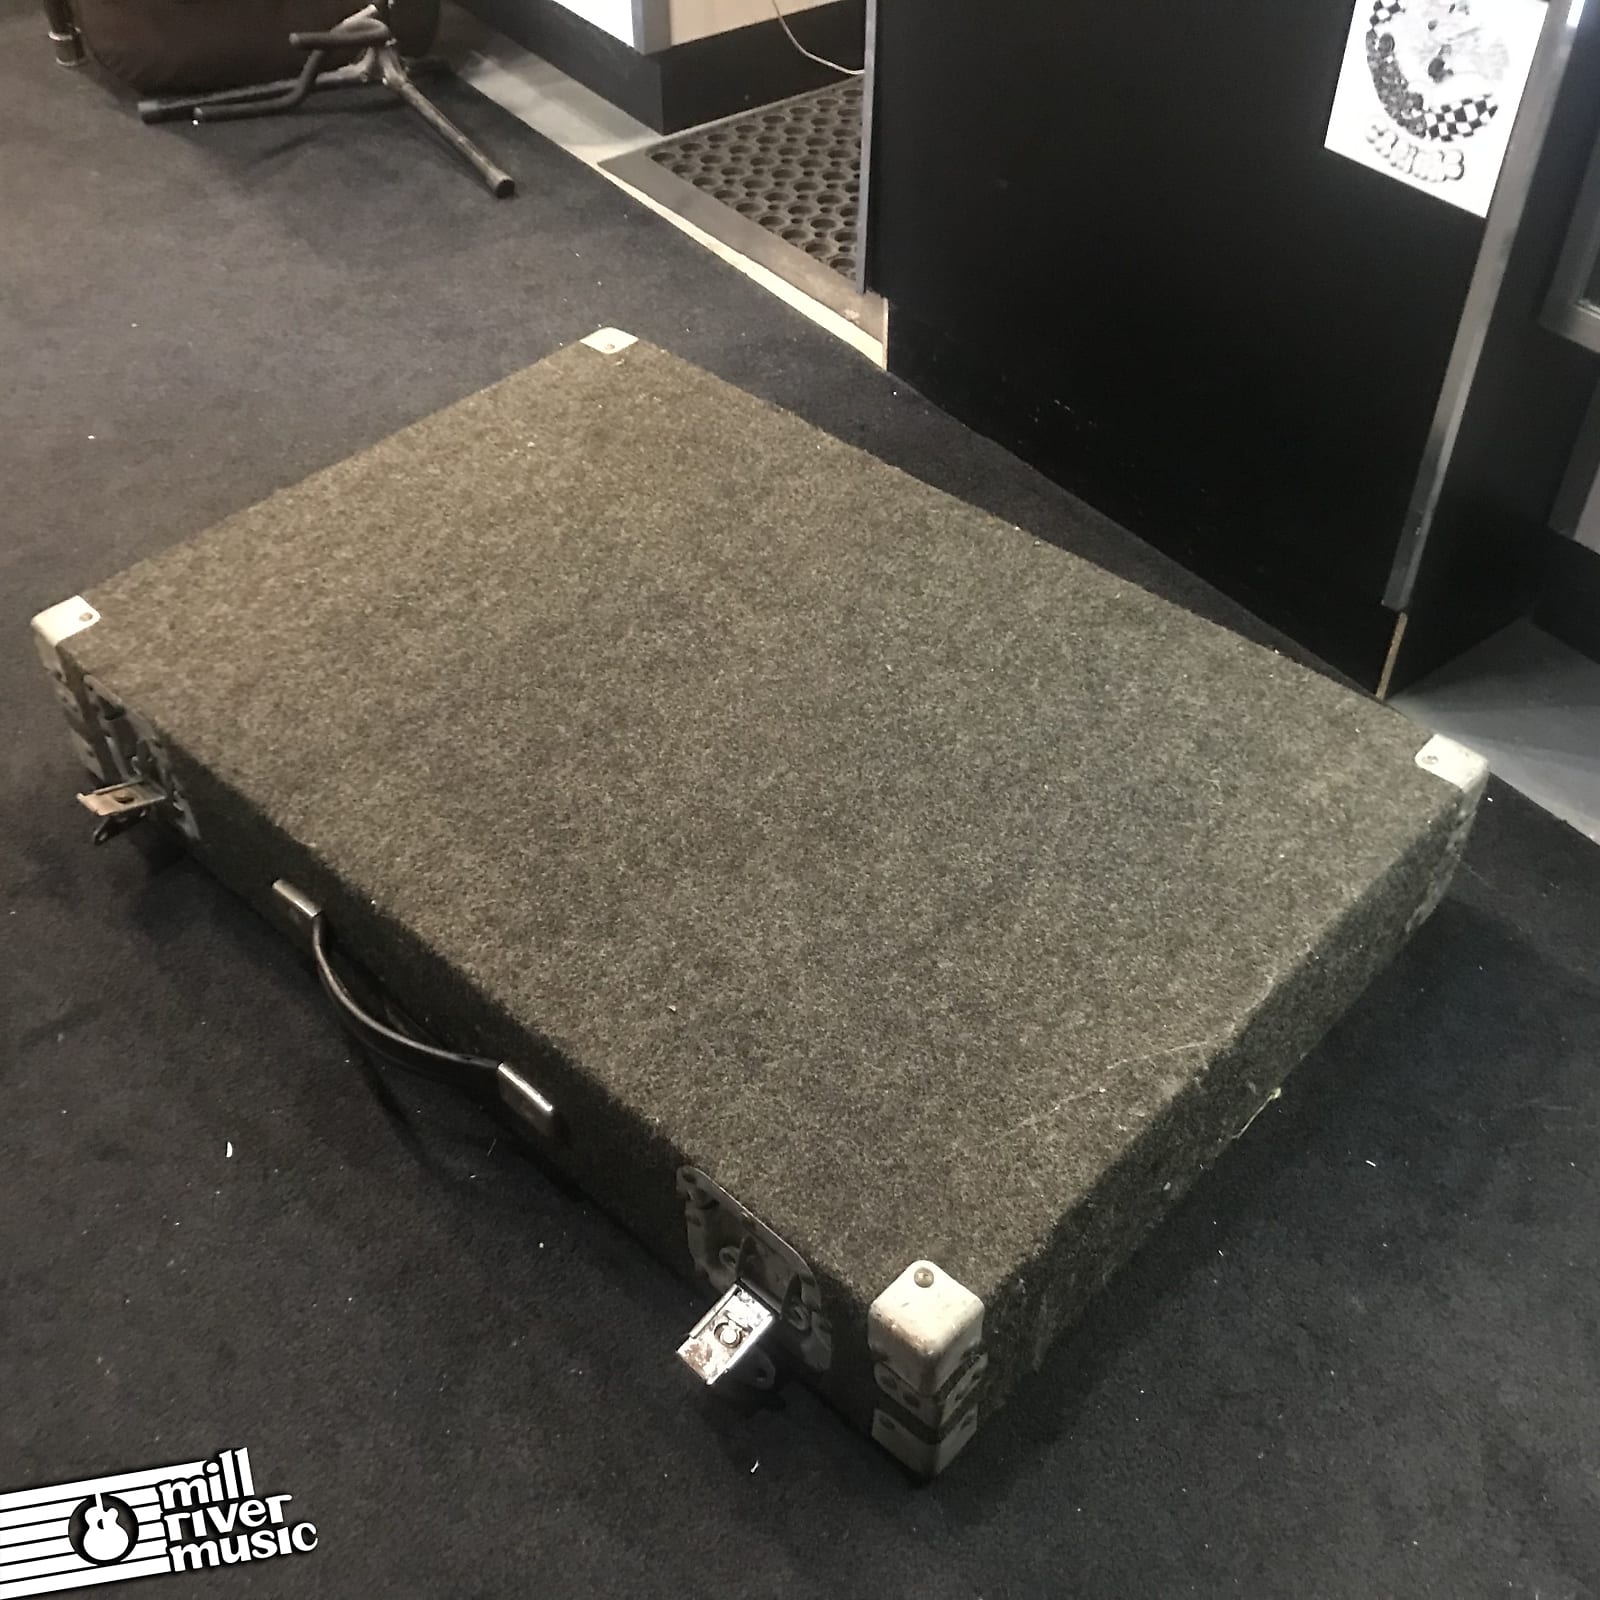 Caseworks USA Road Case for Microphones & Pro Audio Gear Grey Carpet